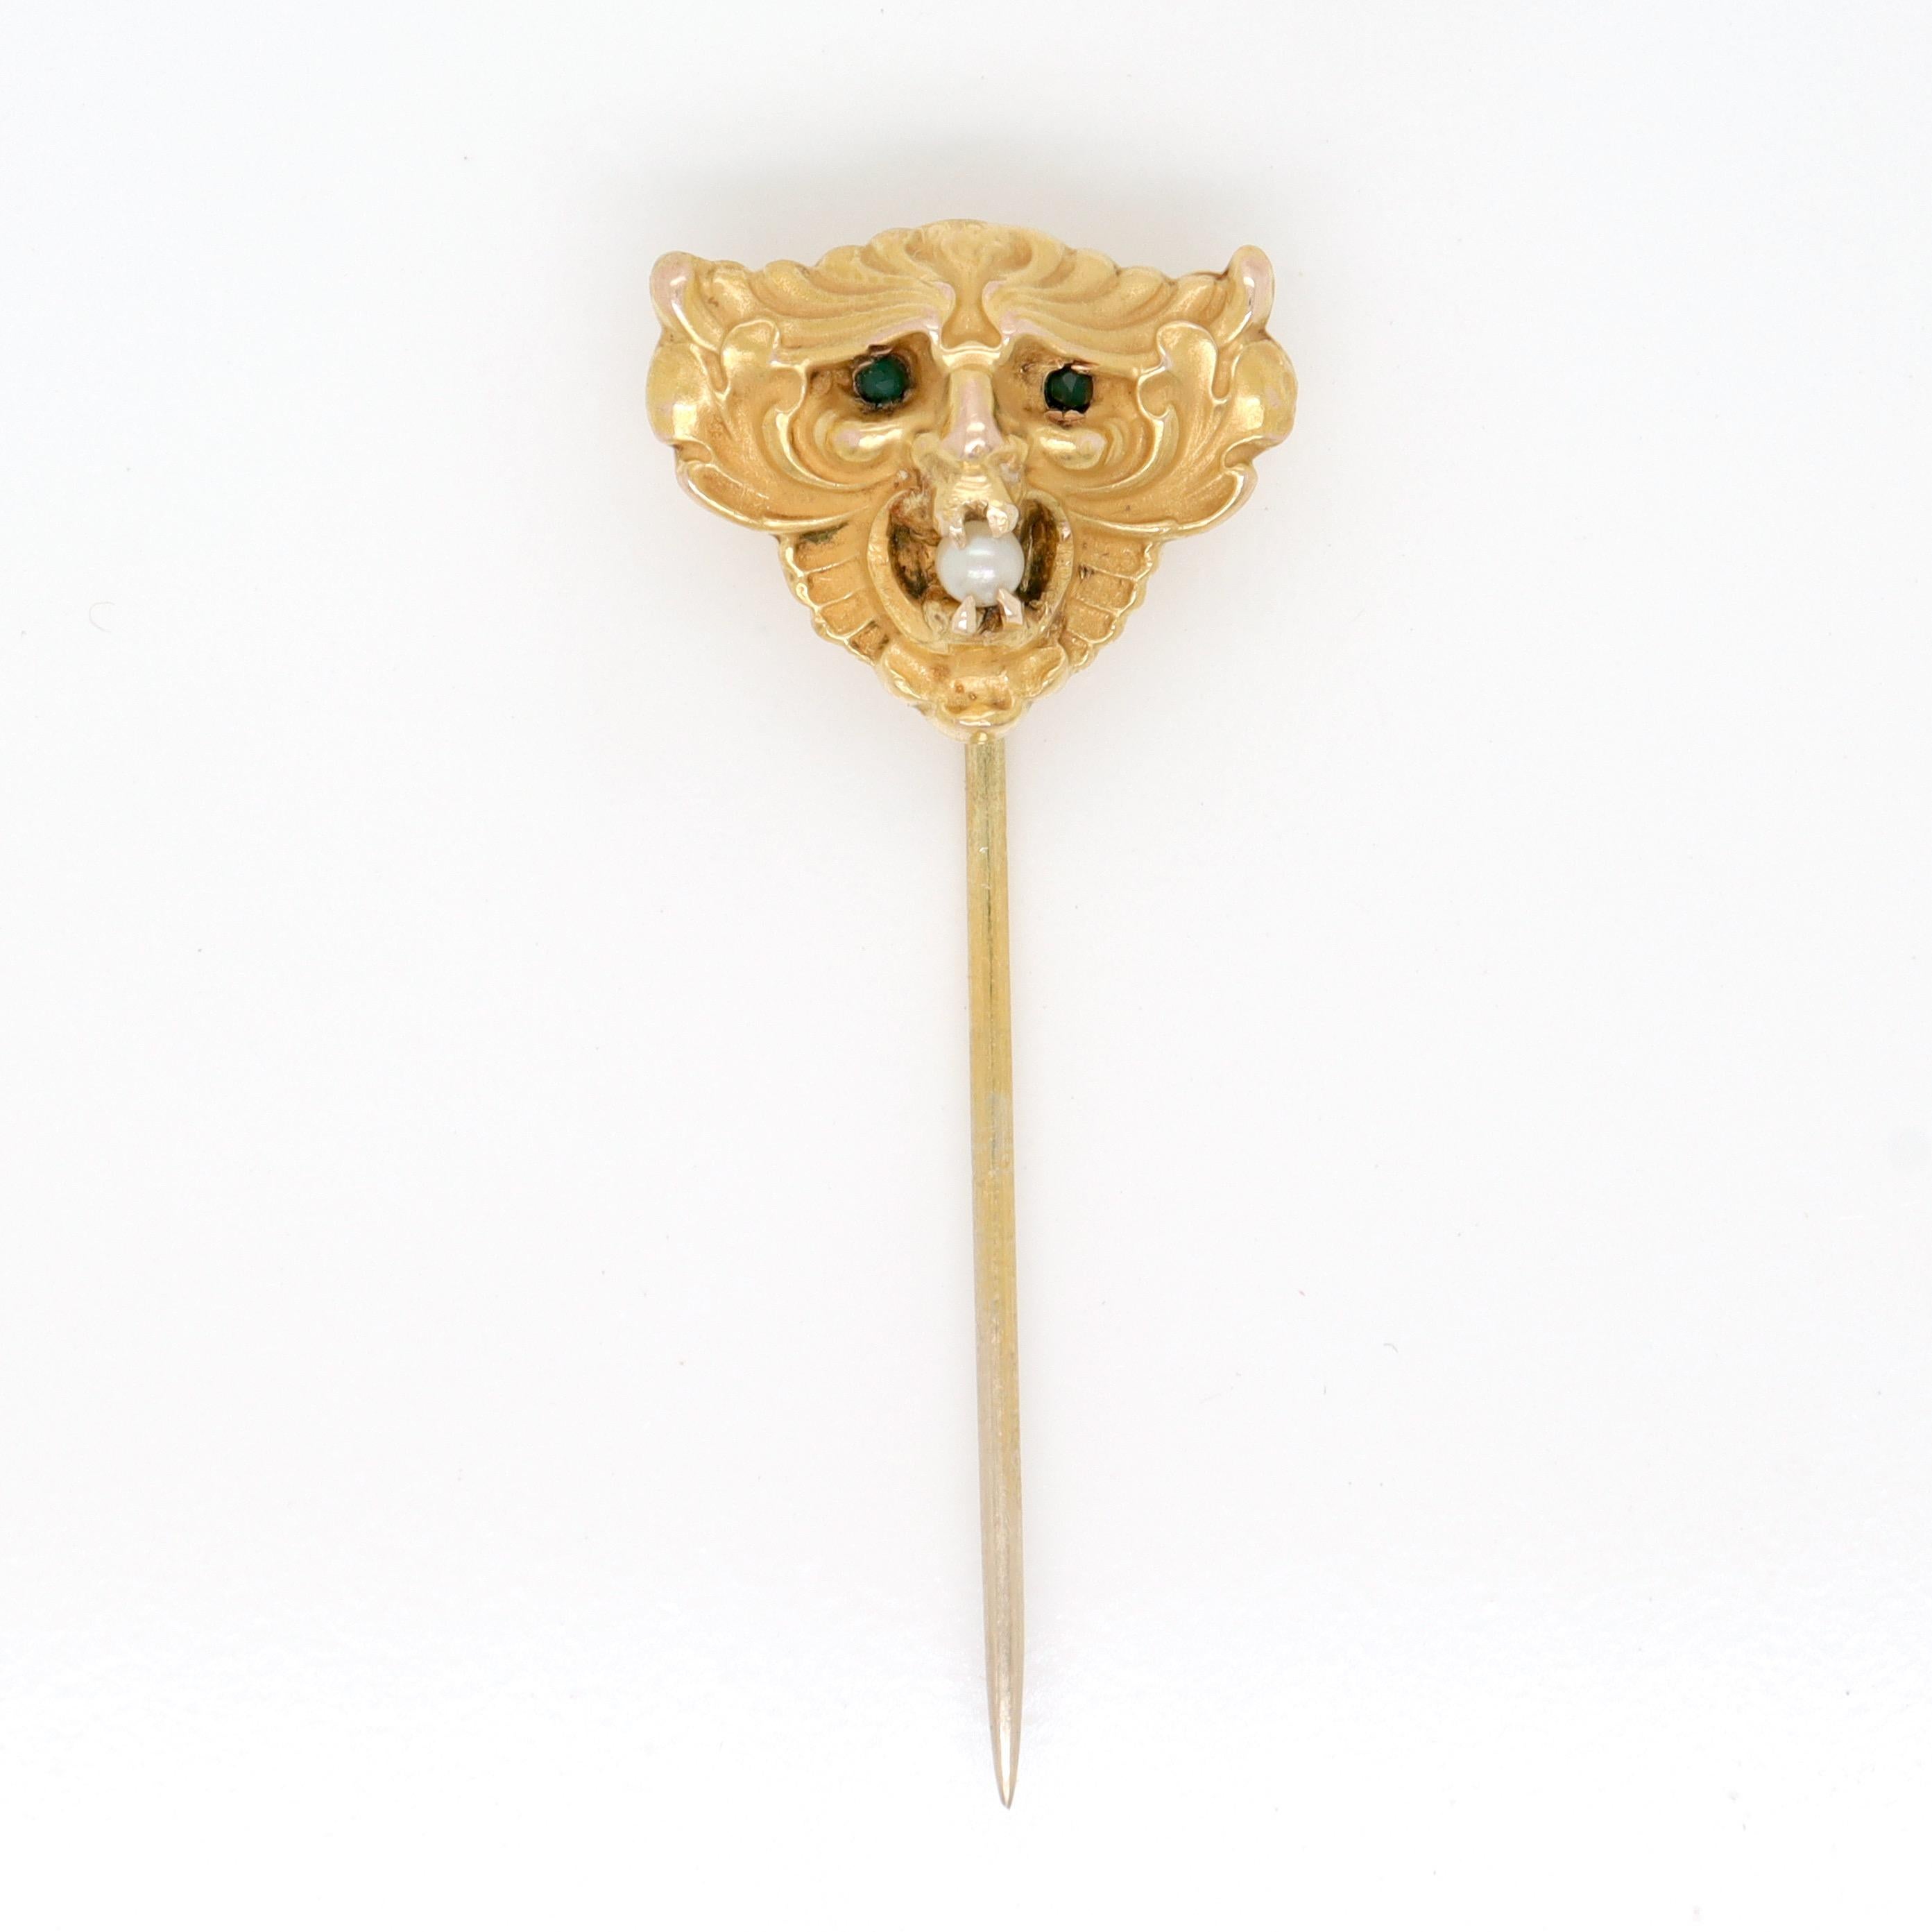 A fine antique Art Nouveau stick pin.

In 14k gold.

In the form of a devil's mask.

Set with small green glass eyes and a small round pearl to the mouth.

Simply a wonderful antique stick pin or lapel pin!

Date:
Early 20th Century

Overall